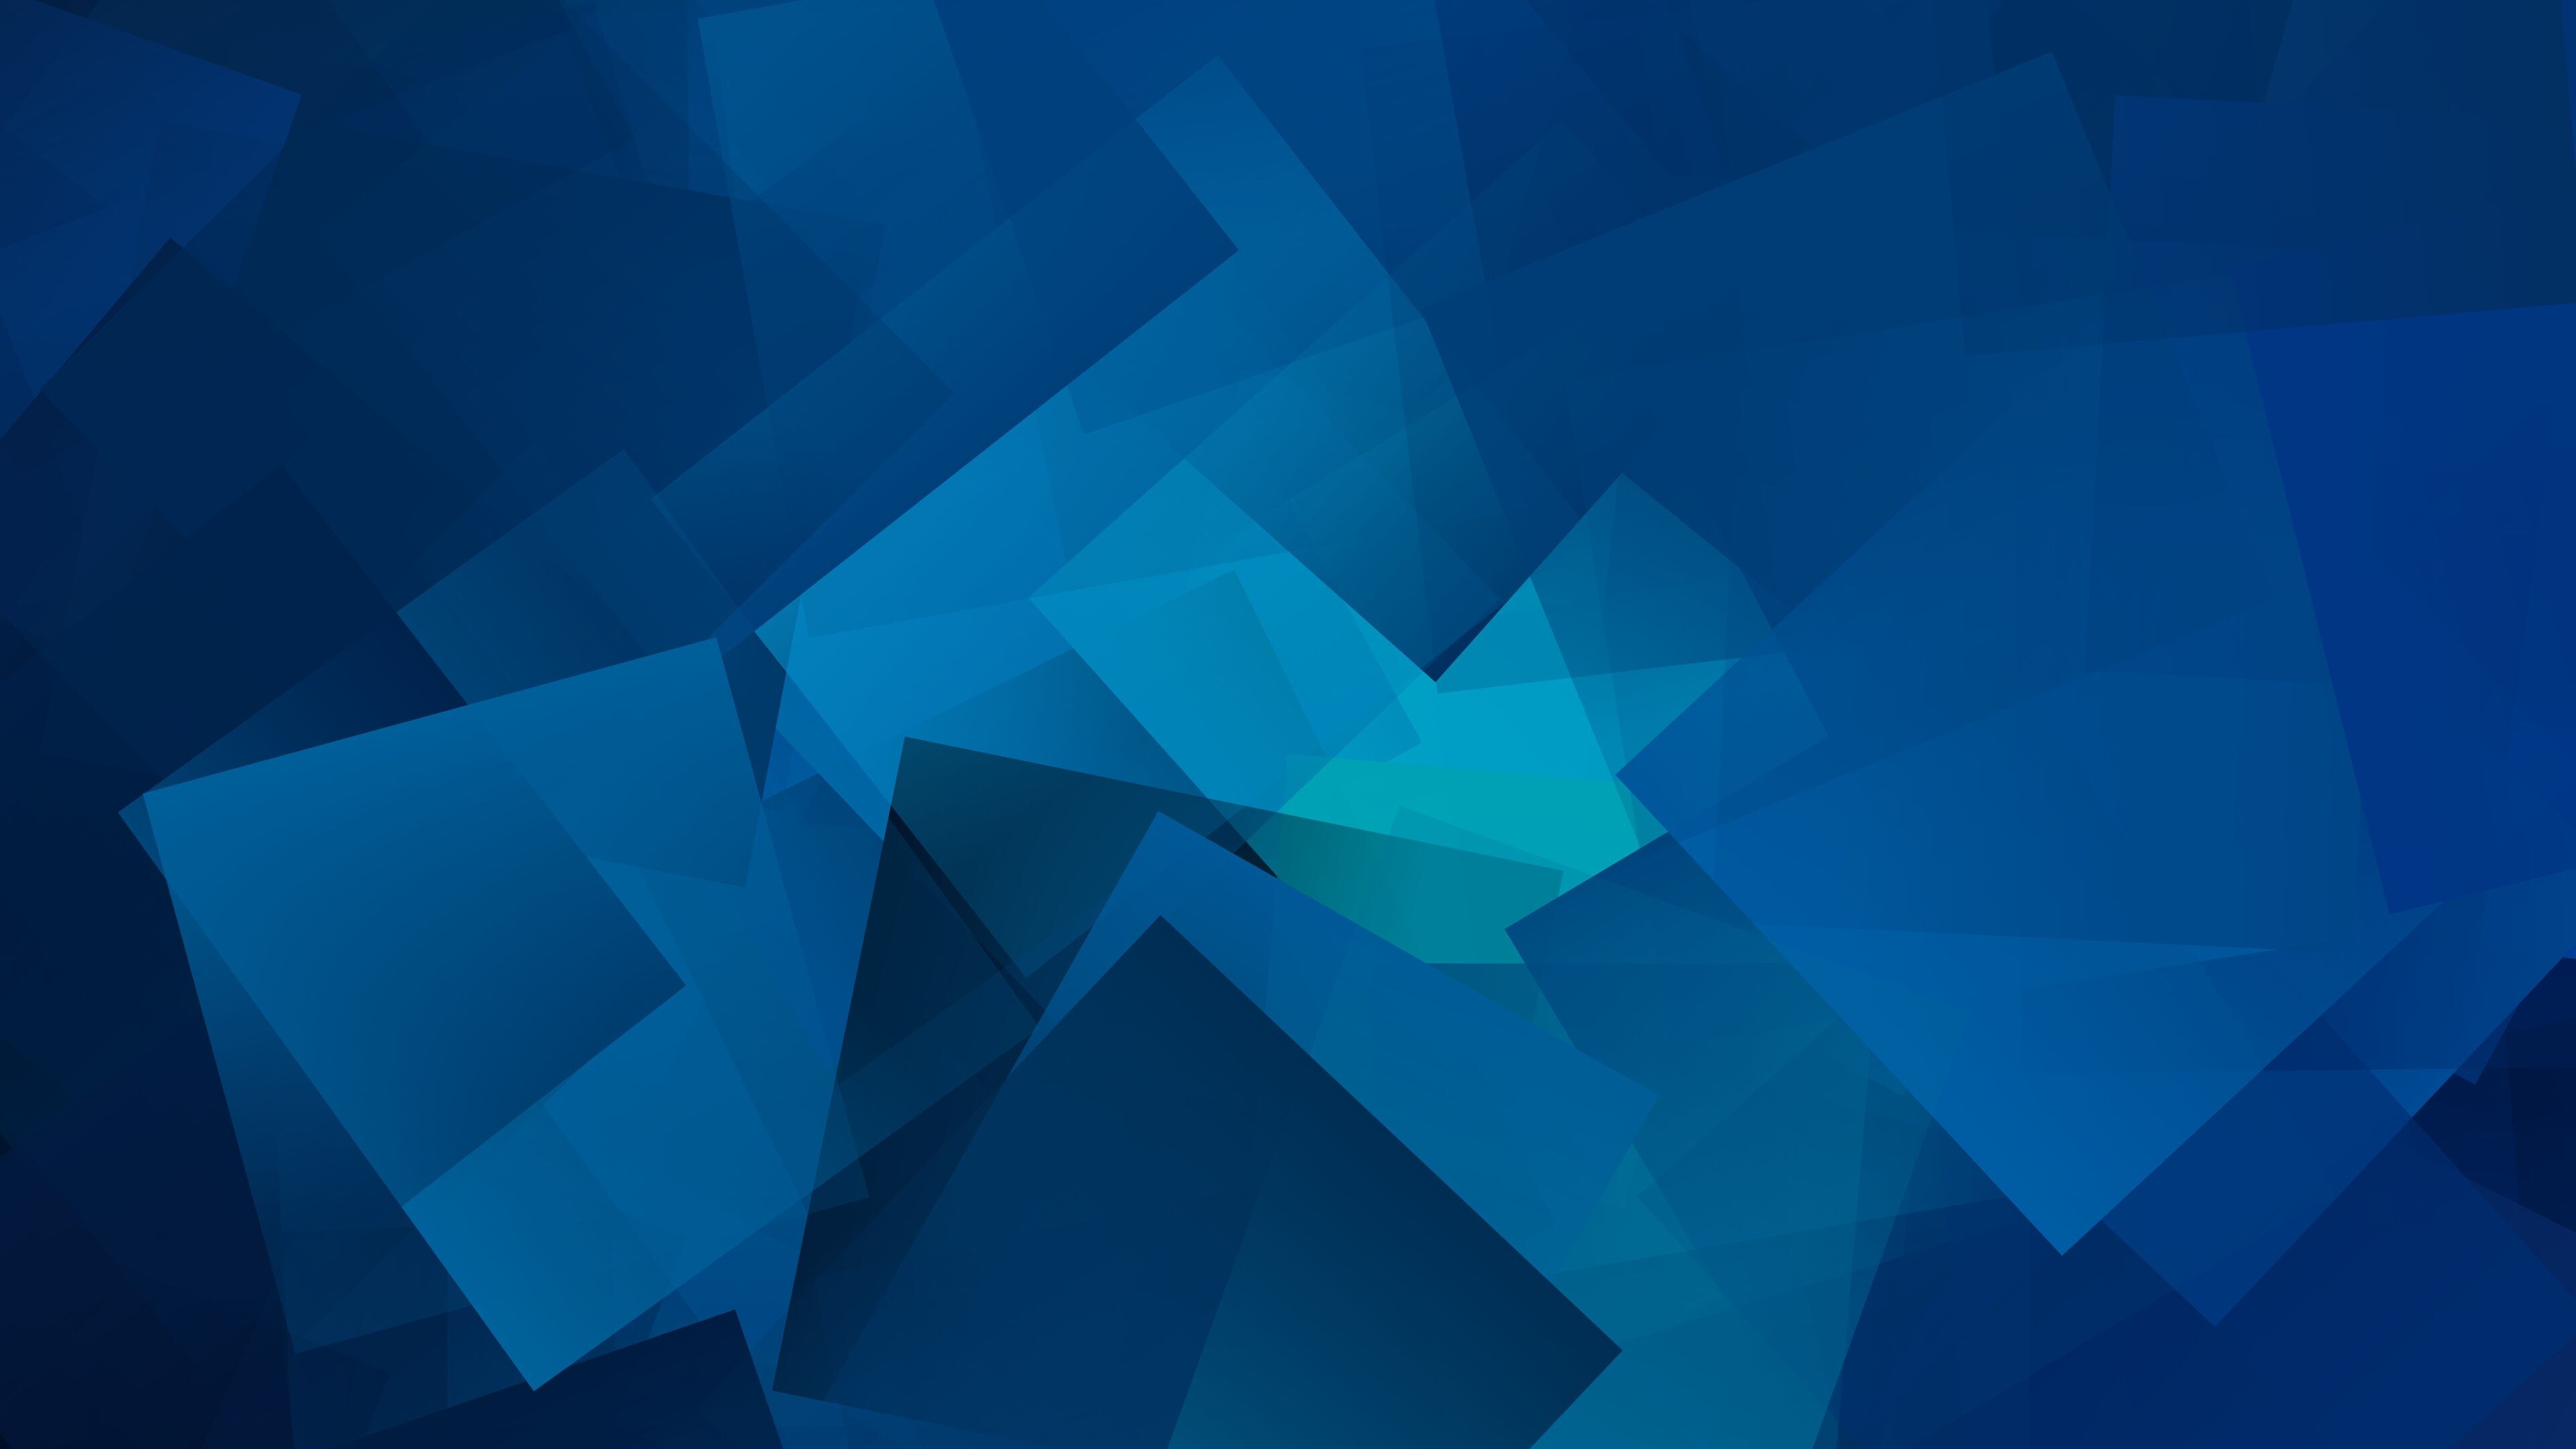 Geometric Abstract: Blue, Rectangles, Squares, Parallel lines. 3840x2160 4K Wallpaper.